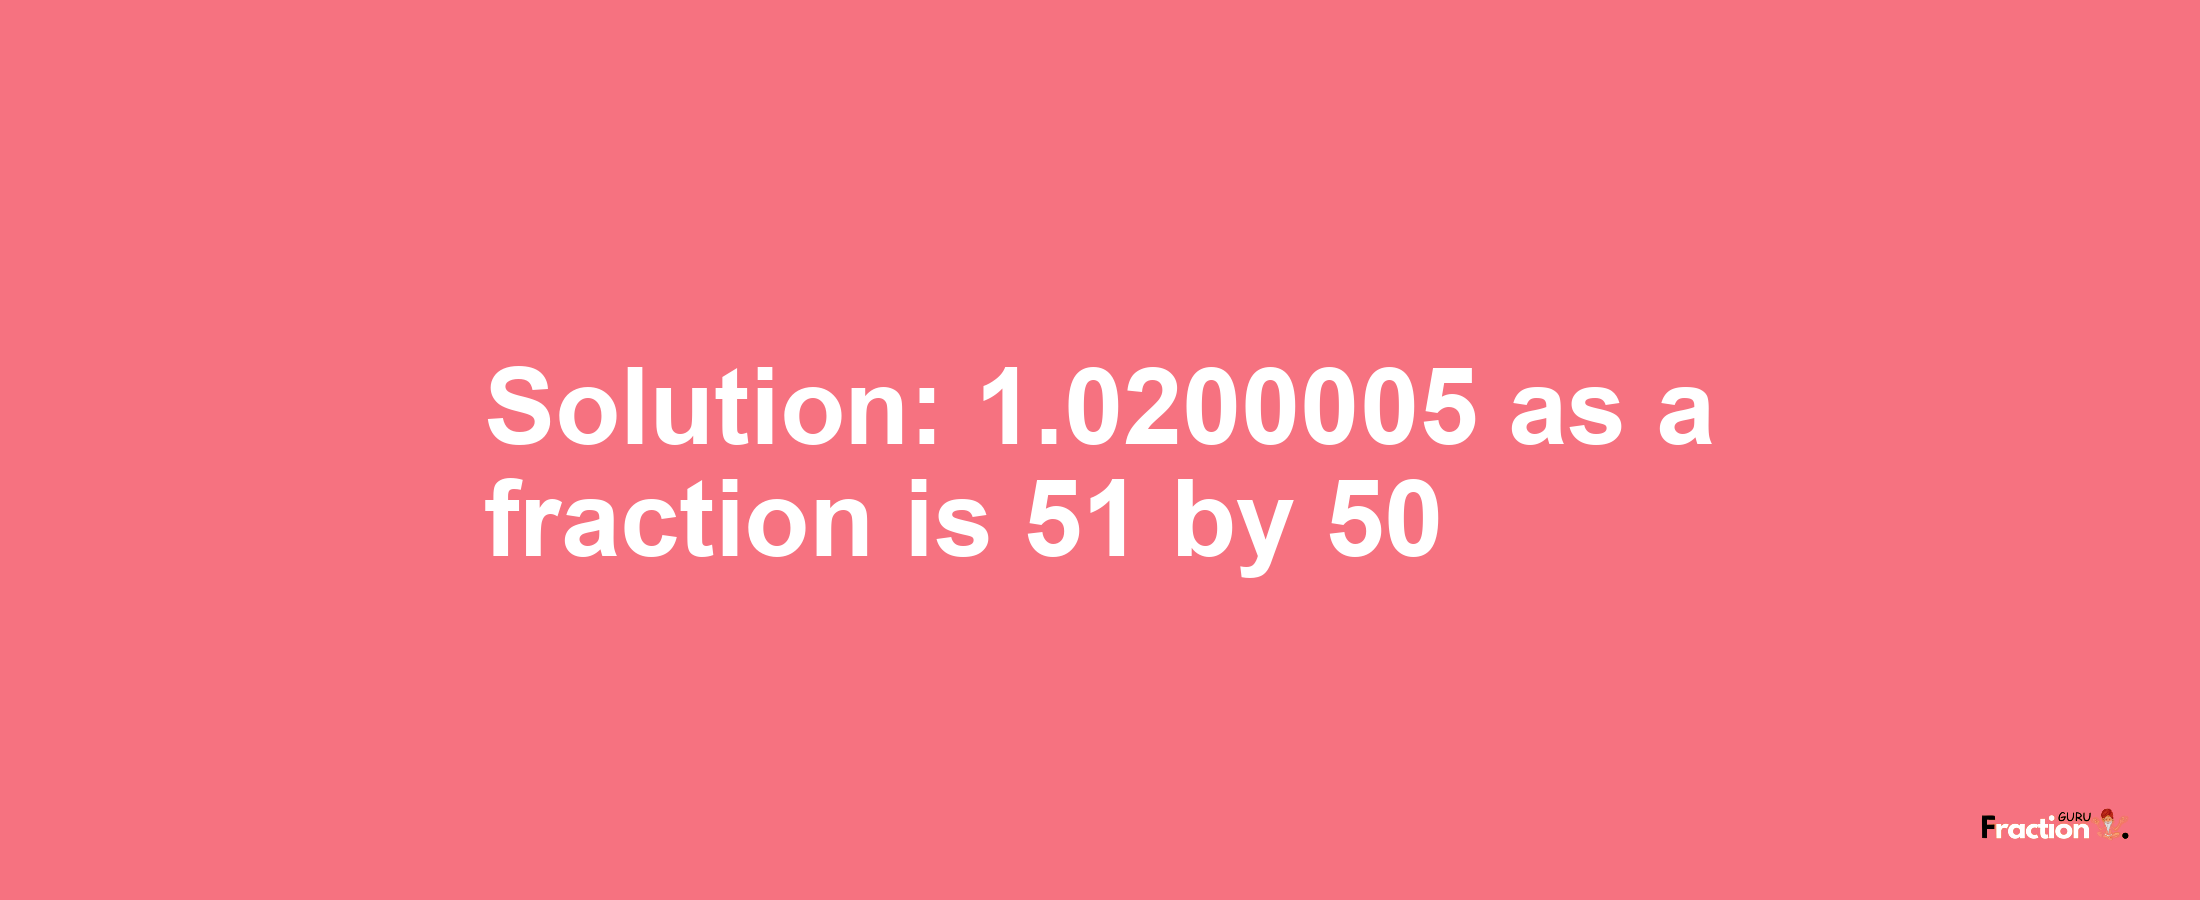 Solution:1.0200005 as a fraction is 51/50